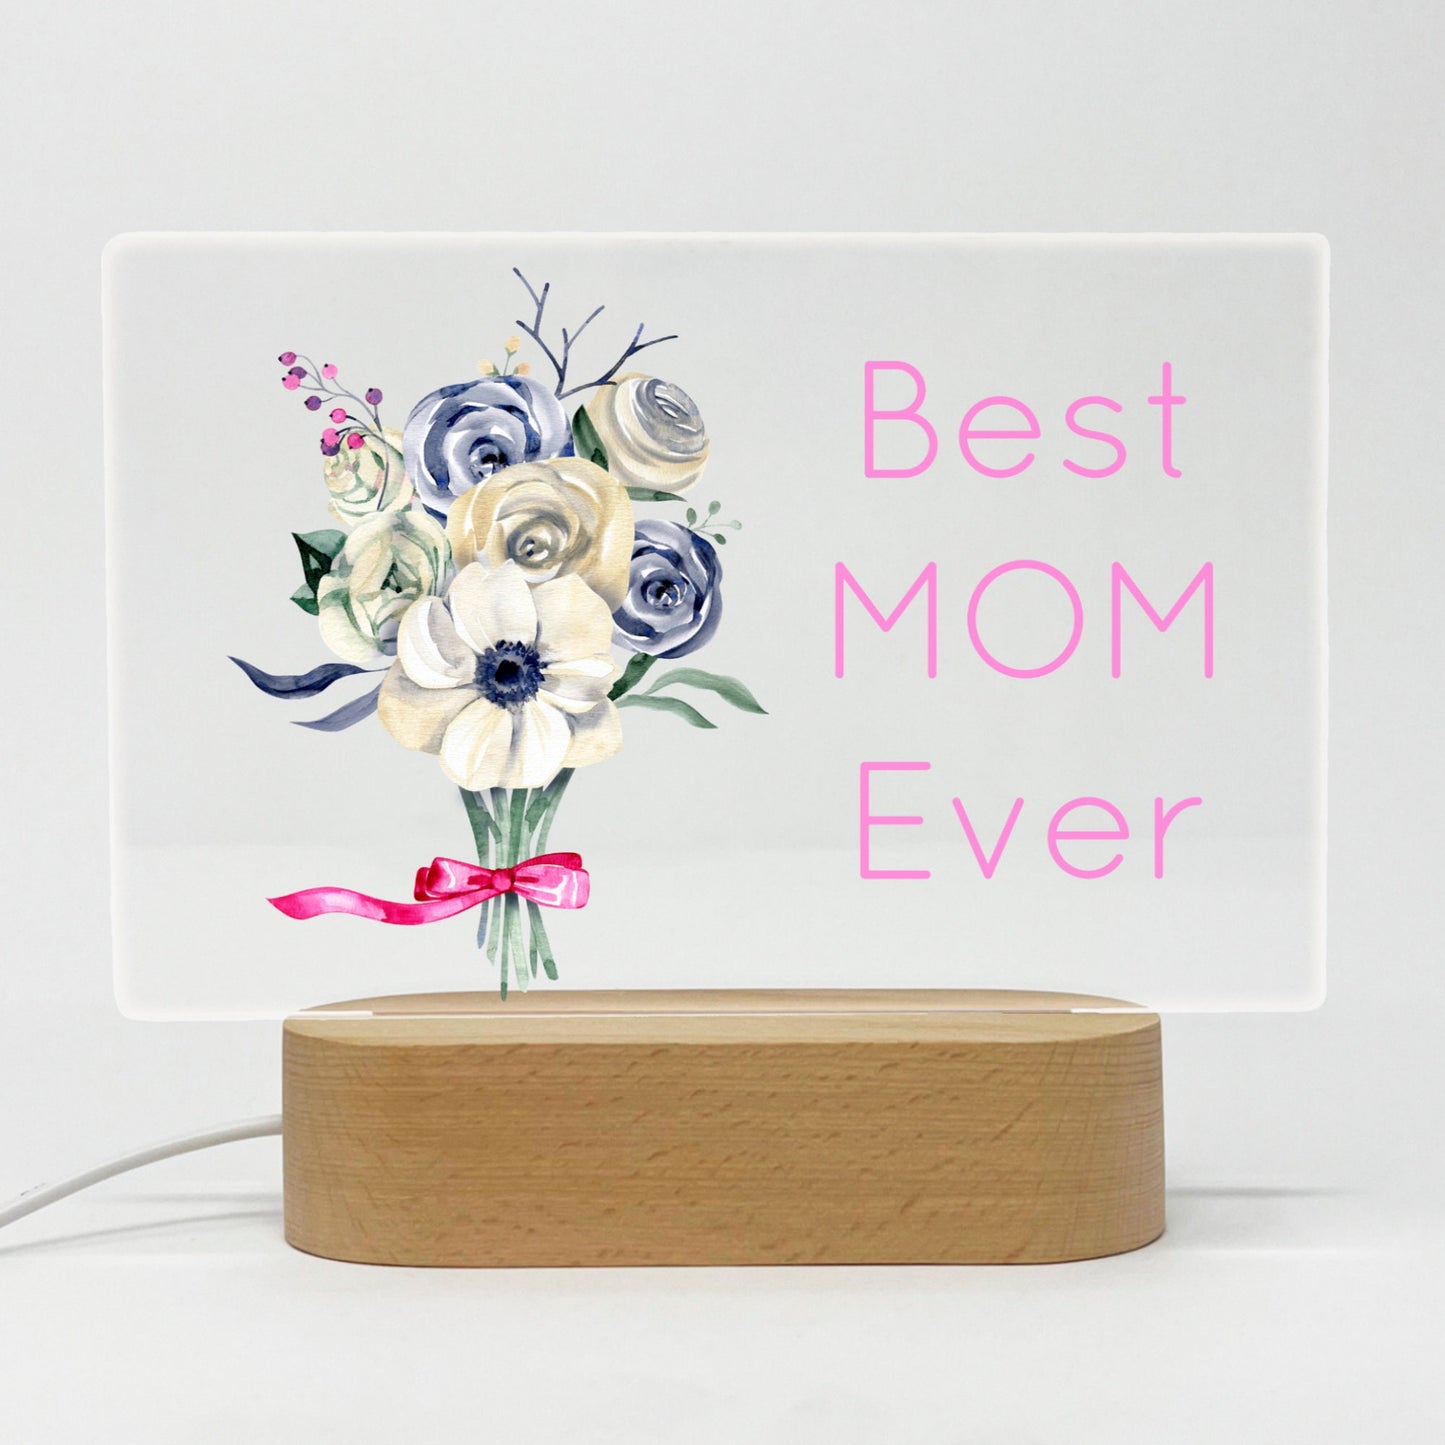 Best Mom Ever Personalized Acrylic Night Light